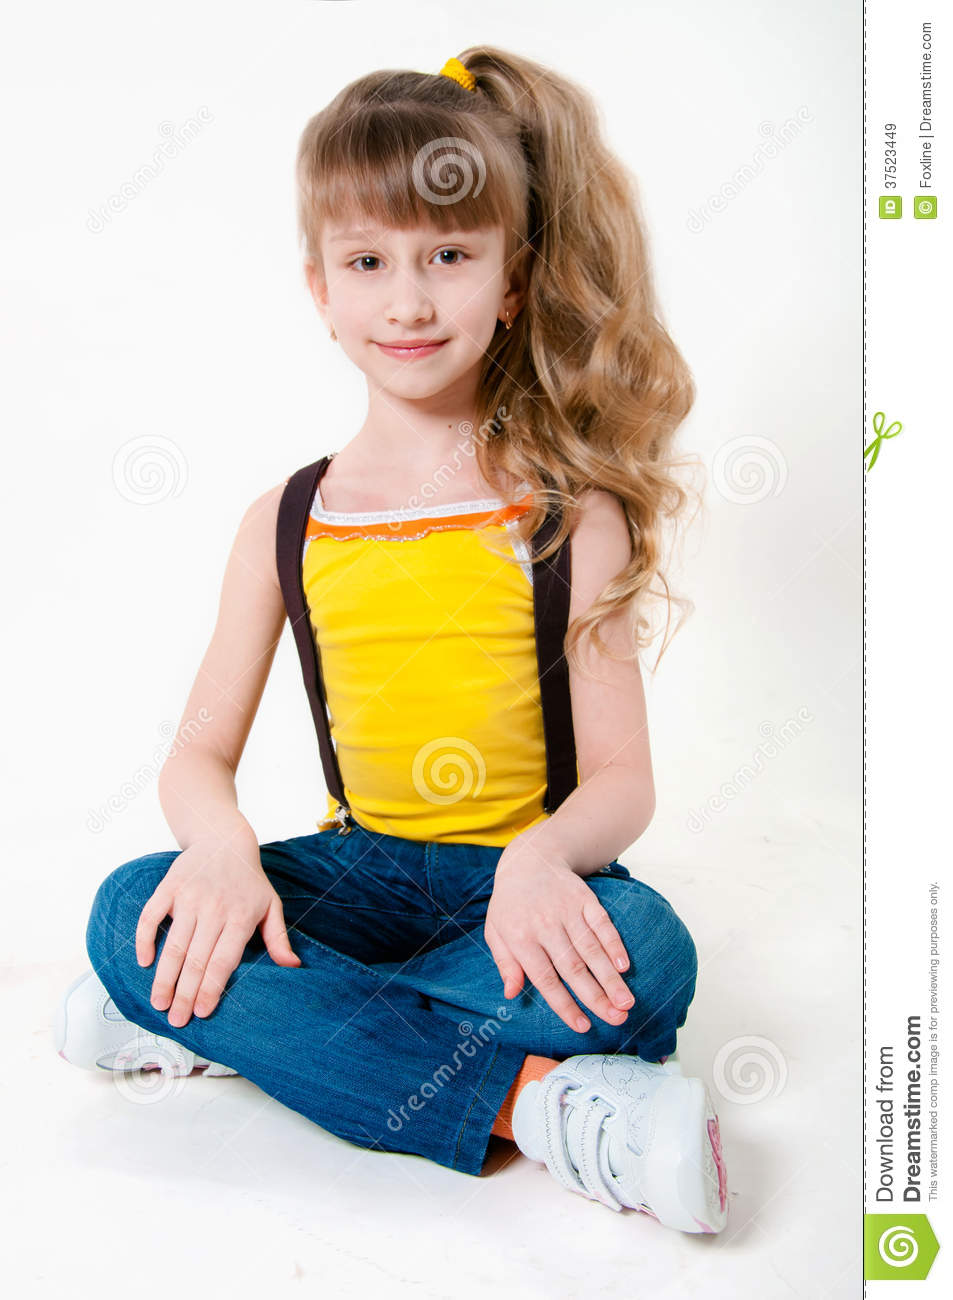 Little Girl In Jeans On A White Background Royalty Free Stock Images